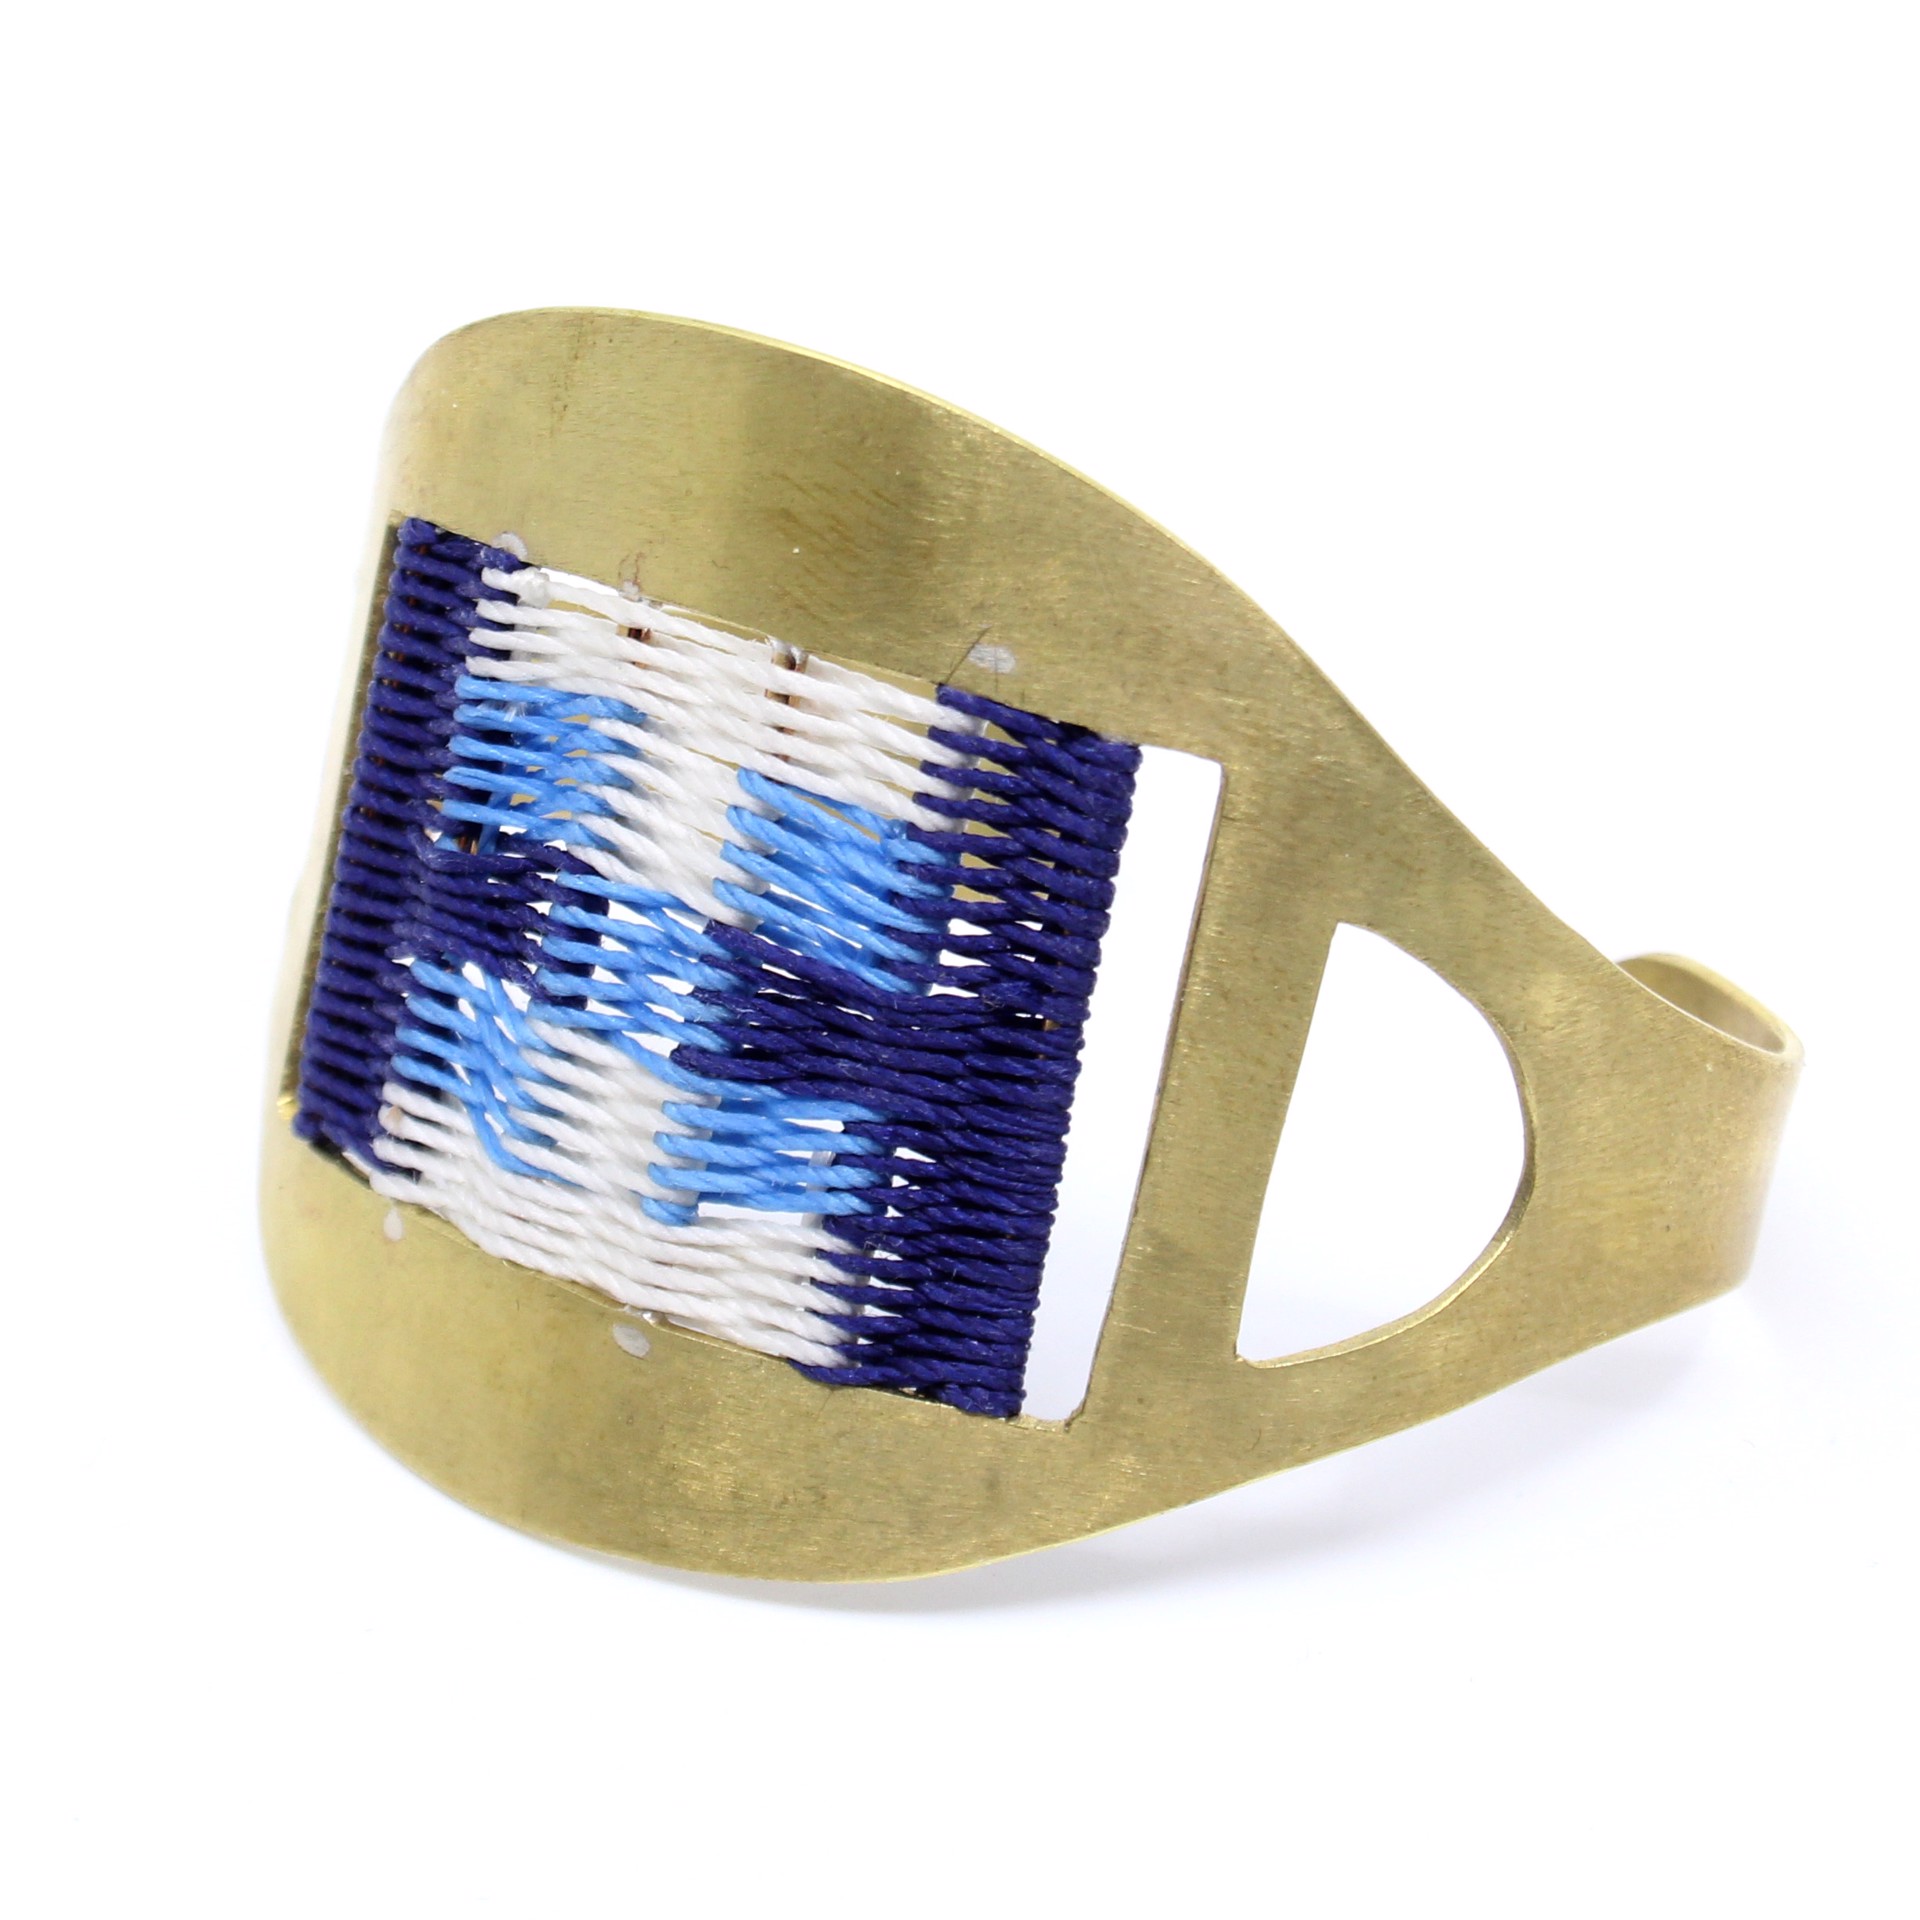 Woven Cuff (blue, white, navy) by Flag Mountain Jewelry